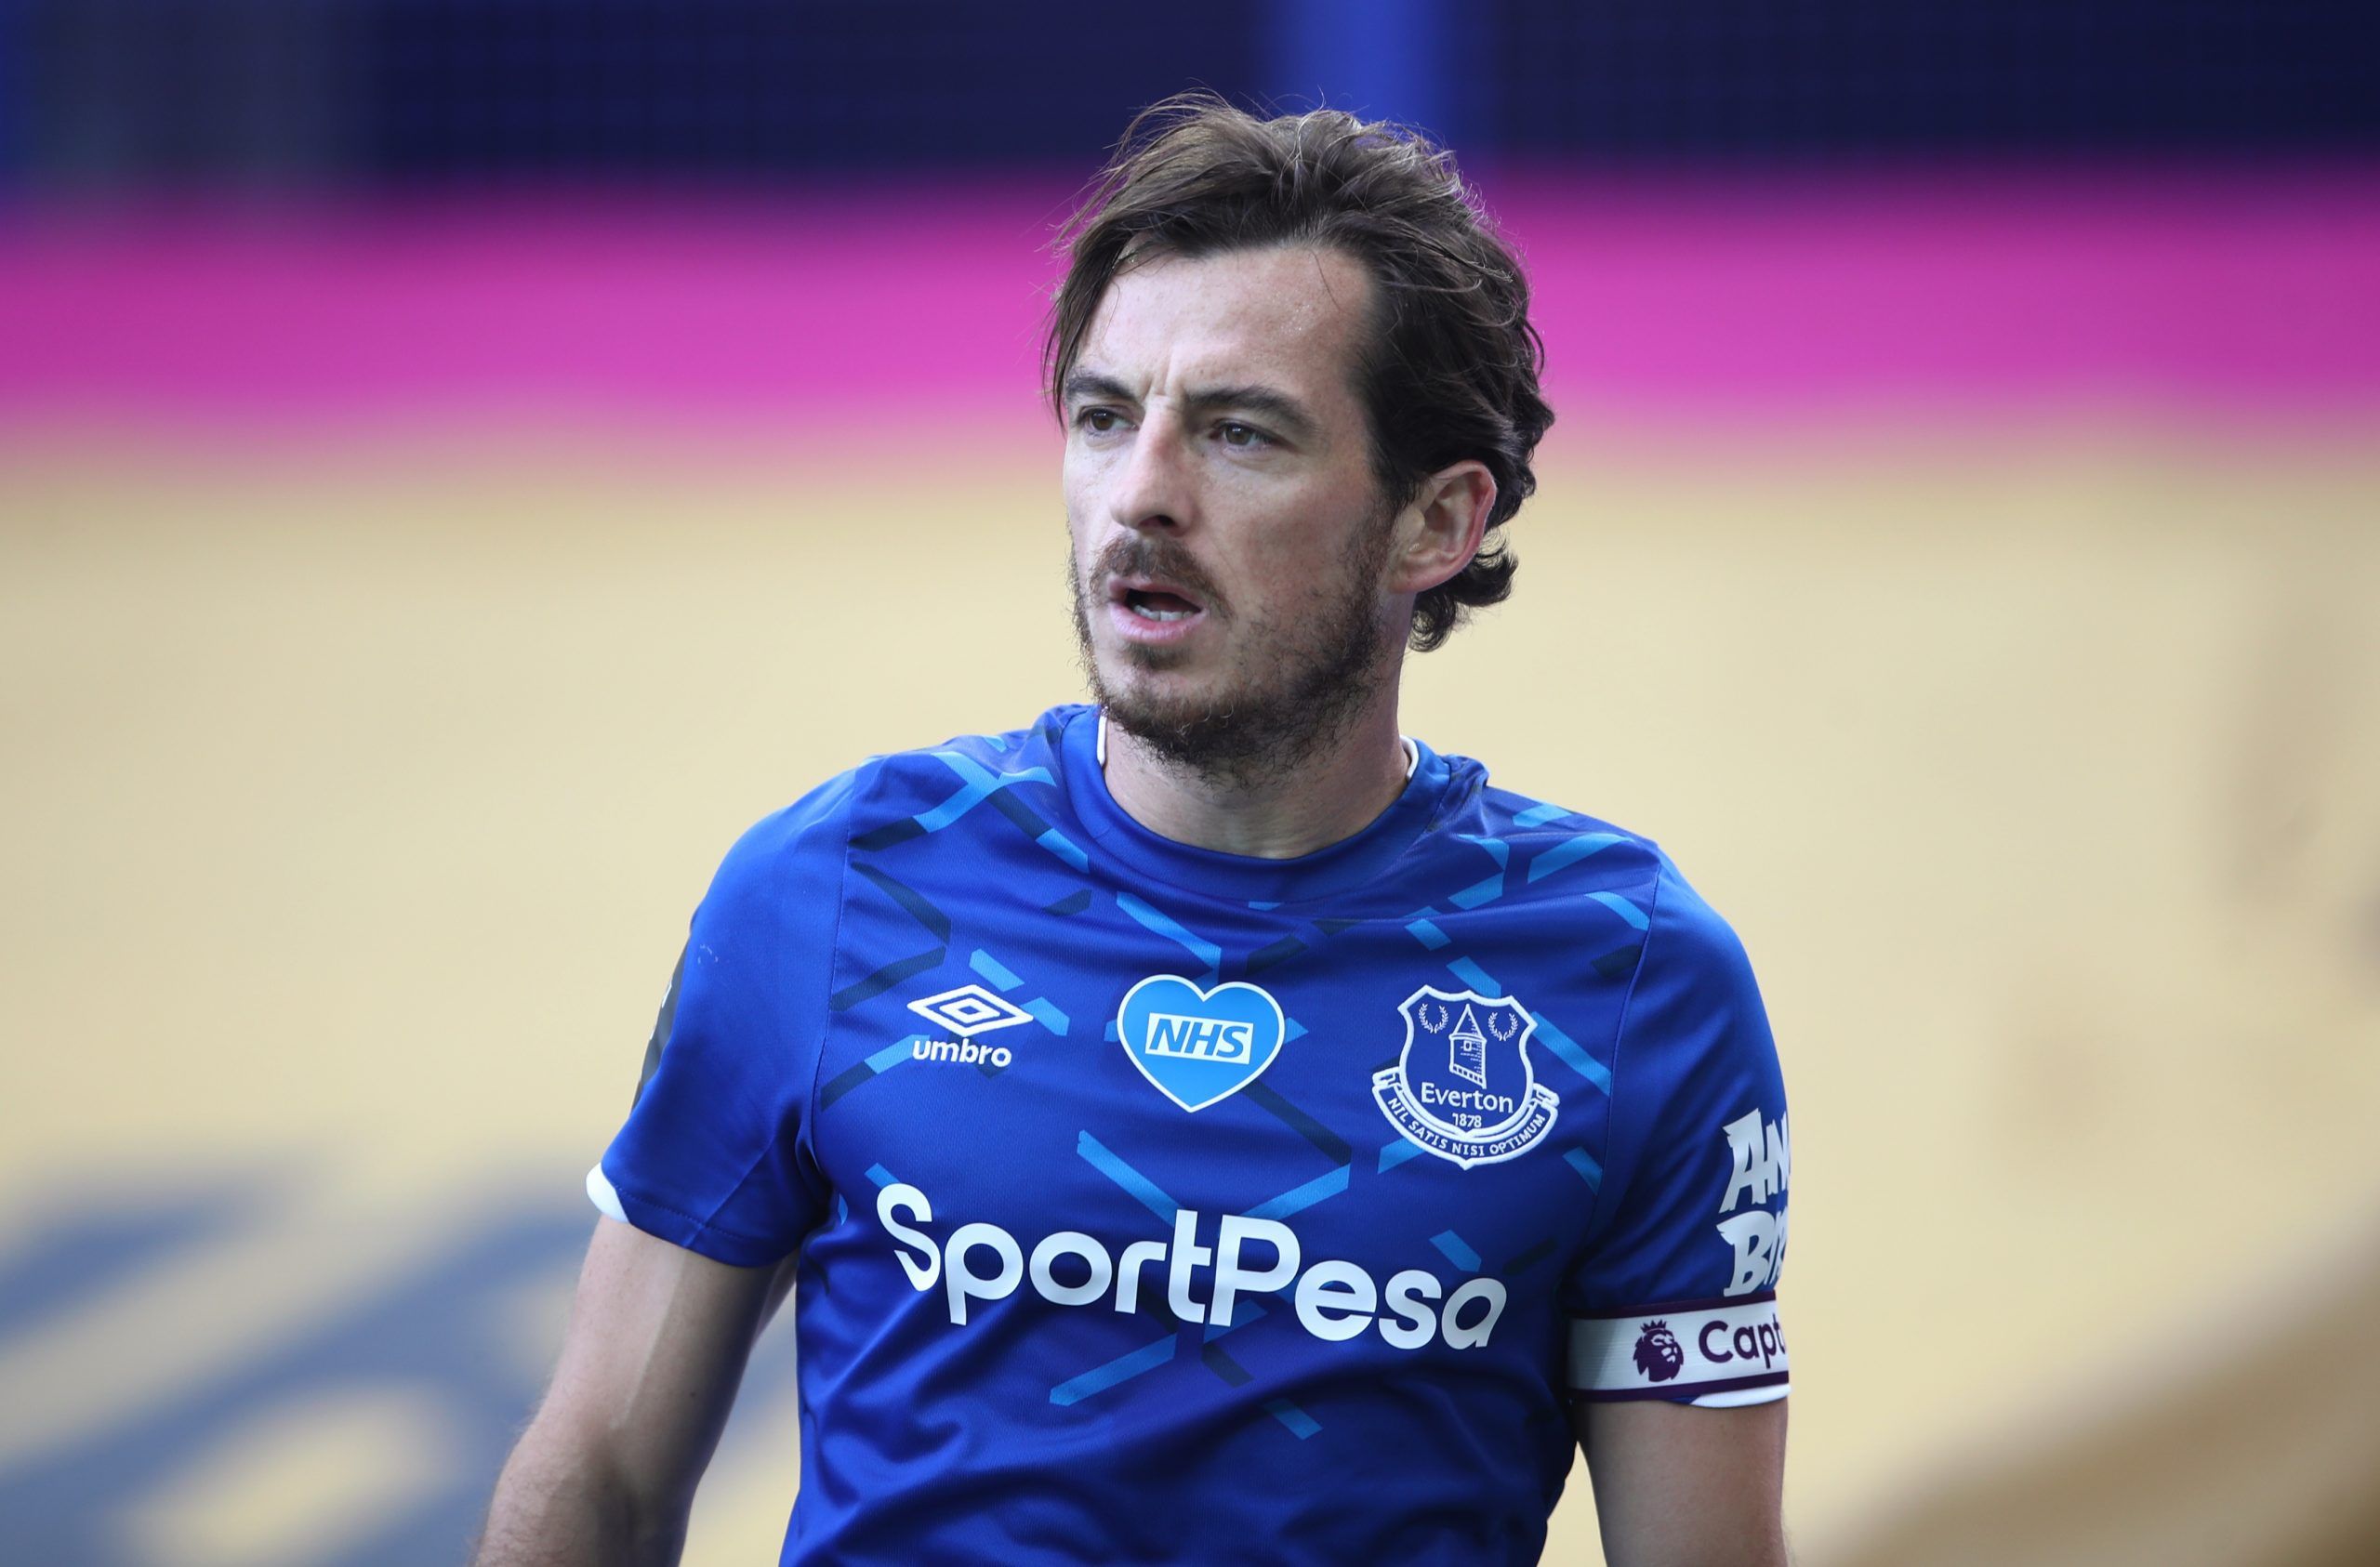 Soccer Football - Premier League - Everton v AFC Bournemouth - Goodison Park, Liverpool, Britain - July 26, 2020  Everton's Leighton Baines, as play resumes behind closed doors following the outbreak of the coronavirus disease (COVID-19) Pool via REUTERS/Tim Goode EDITORIAL USE ONLY. No use with unauthorized audio, video, data, fixture lists, club/league logos or 'live' services. Online in-match use limited to 75 images, no video emulation. No use in betting, games or single club/league/player p